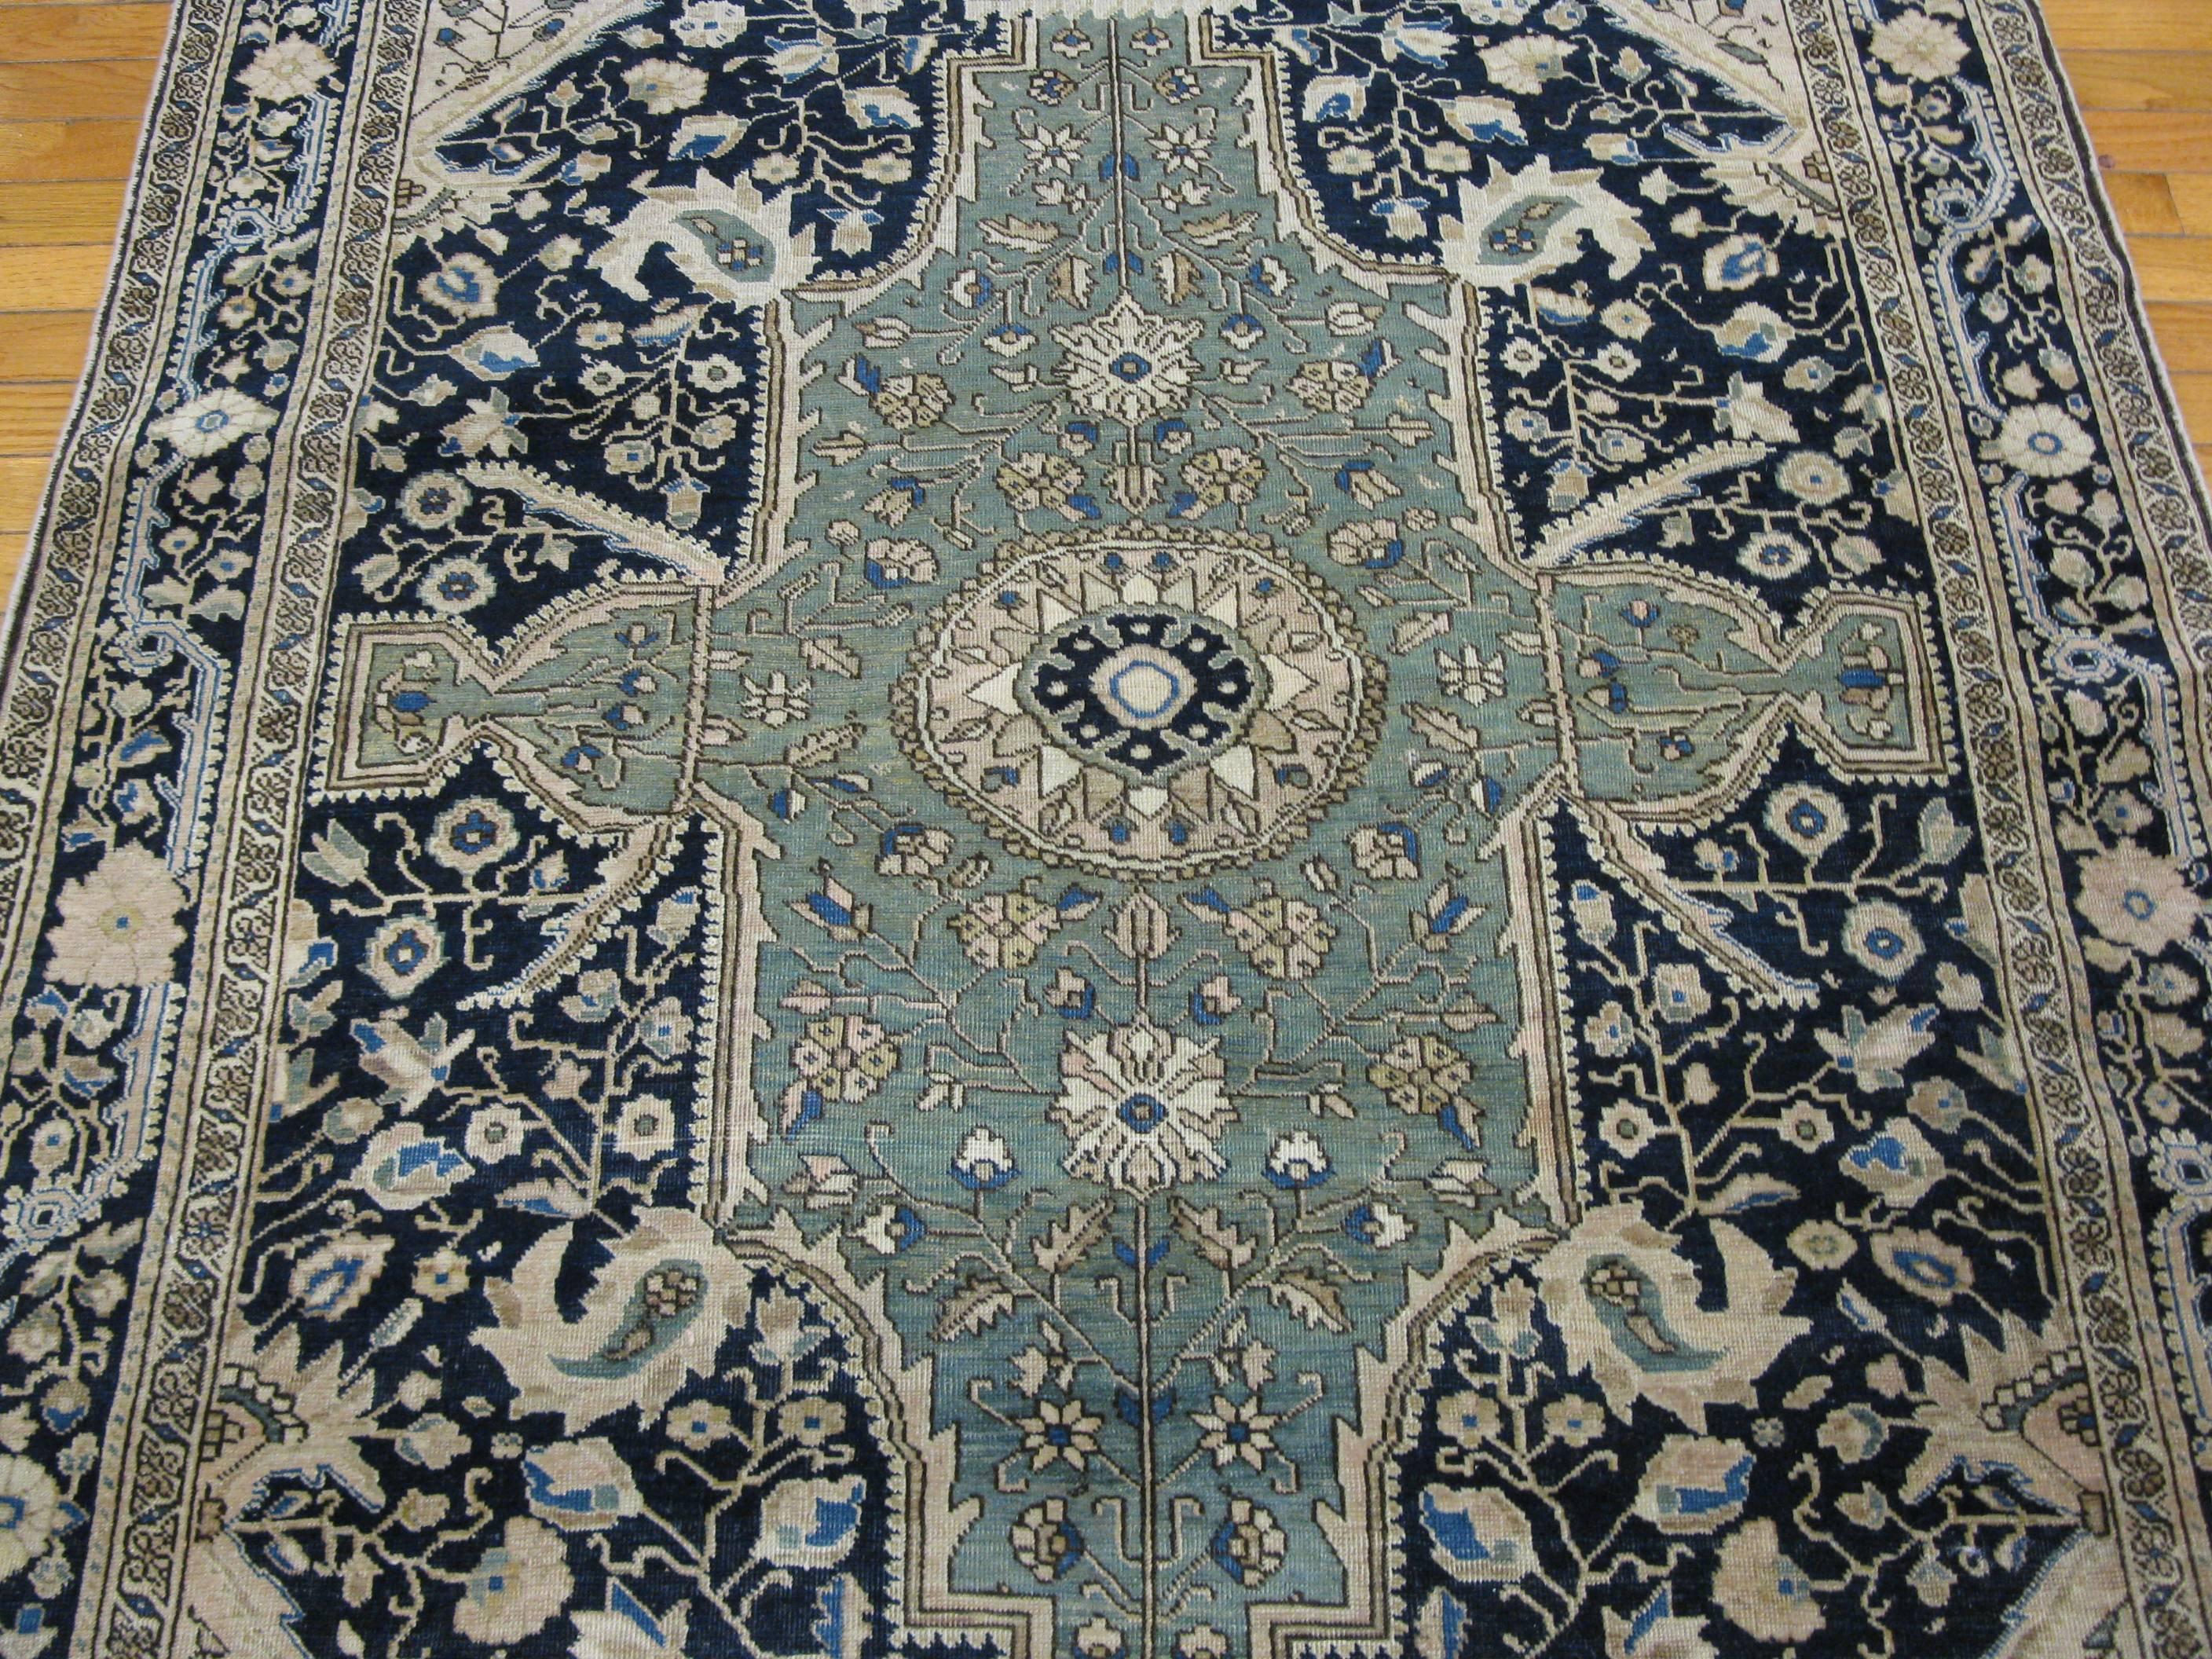 This is a beautiful and rare color combination antique hand knotted Persian Sarouk Farahan rug. It has traditional corner and central medallion design. The rug measures 4' 3'' x 6' 4''. It is in excellent condition.